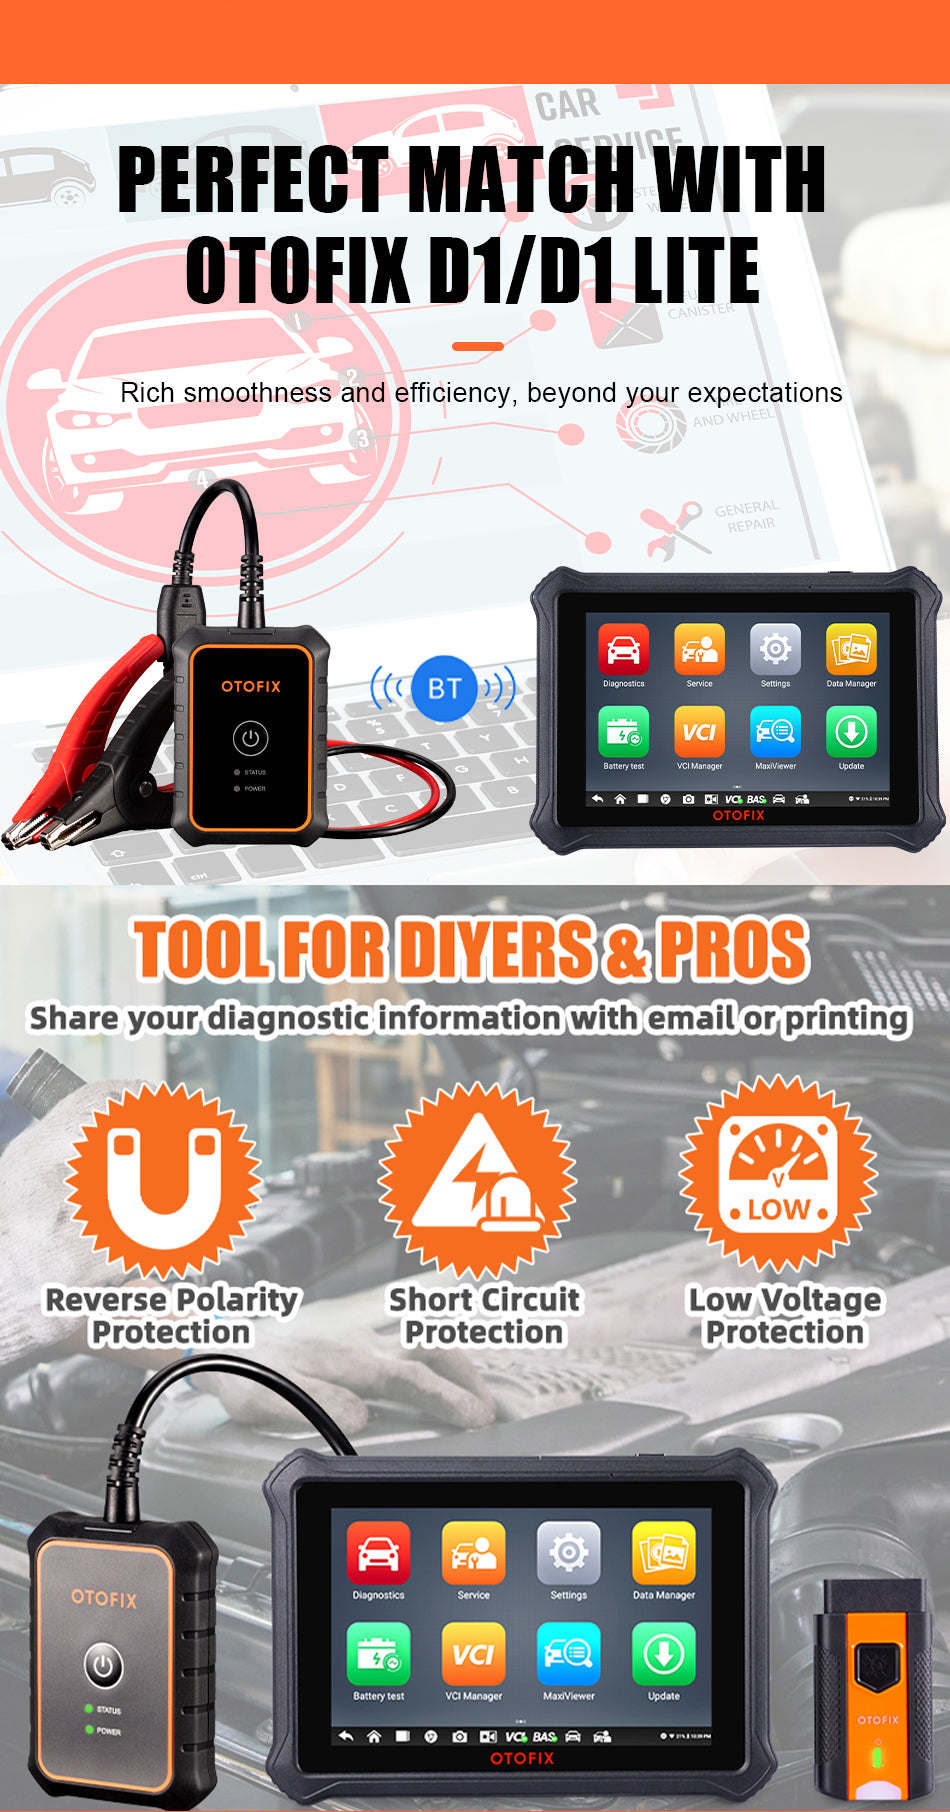 OTOFIX BT1 Lite Car Battery Analyser Auto Diagnostic Tool OBD2 Scanner Tester is perfect to matching with OTOFIX D1, D1 lite with rich smoothness and efficiency beyond your expectation.